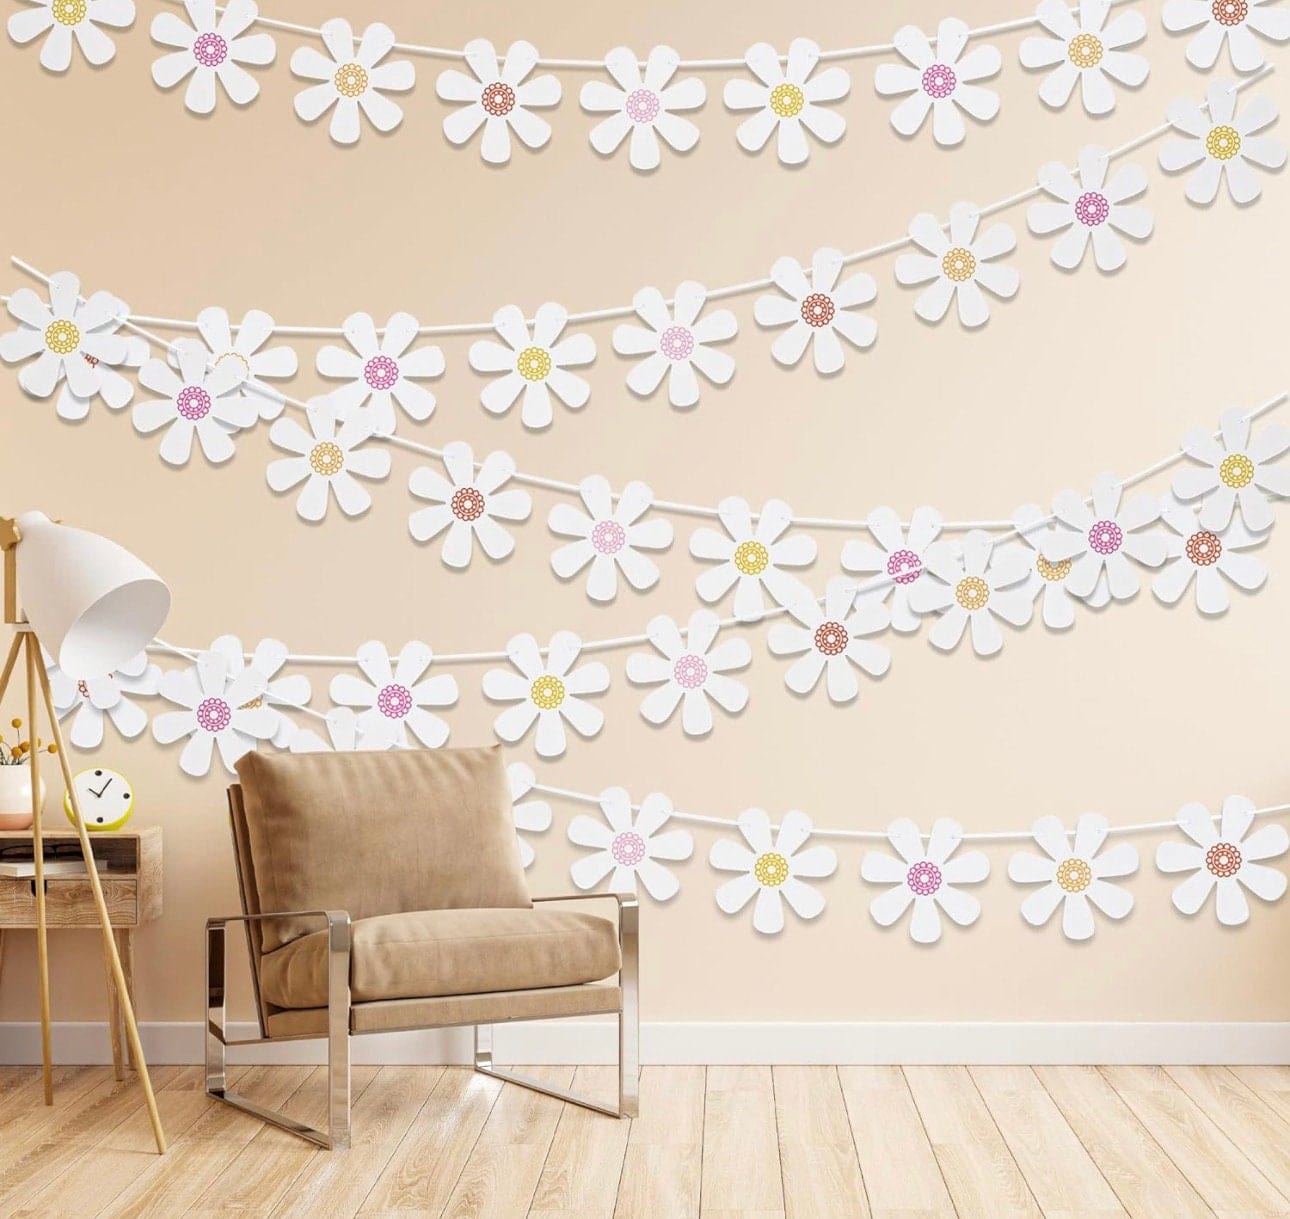 daisy banner hanging on wall with chair and light under white daisy garland 